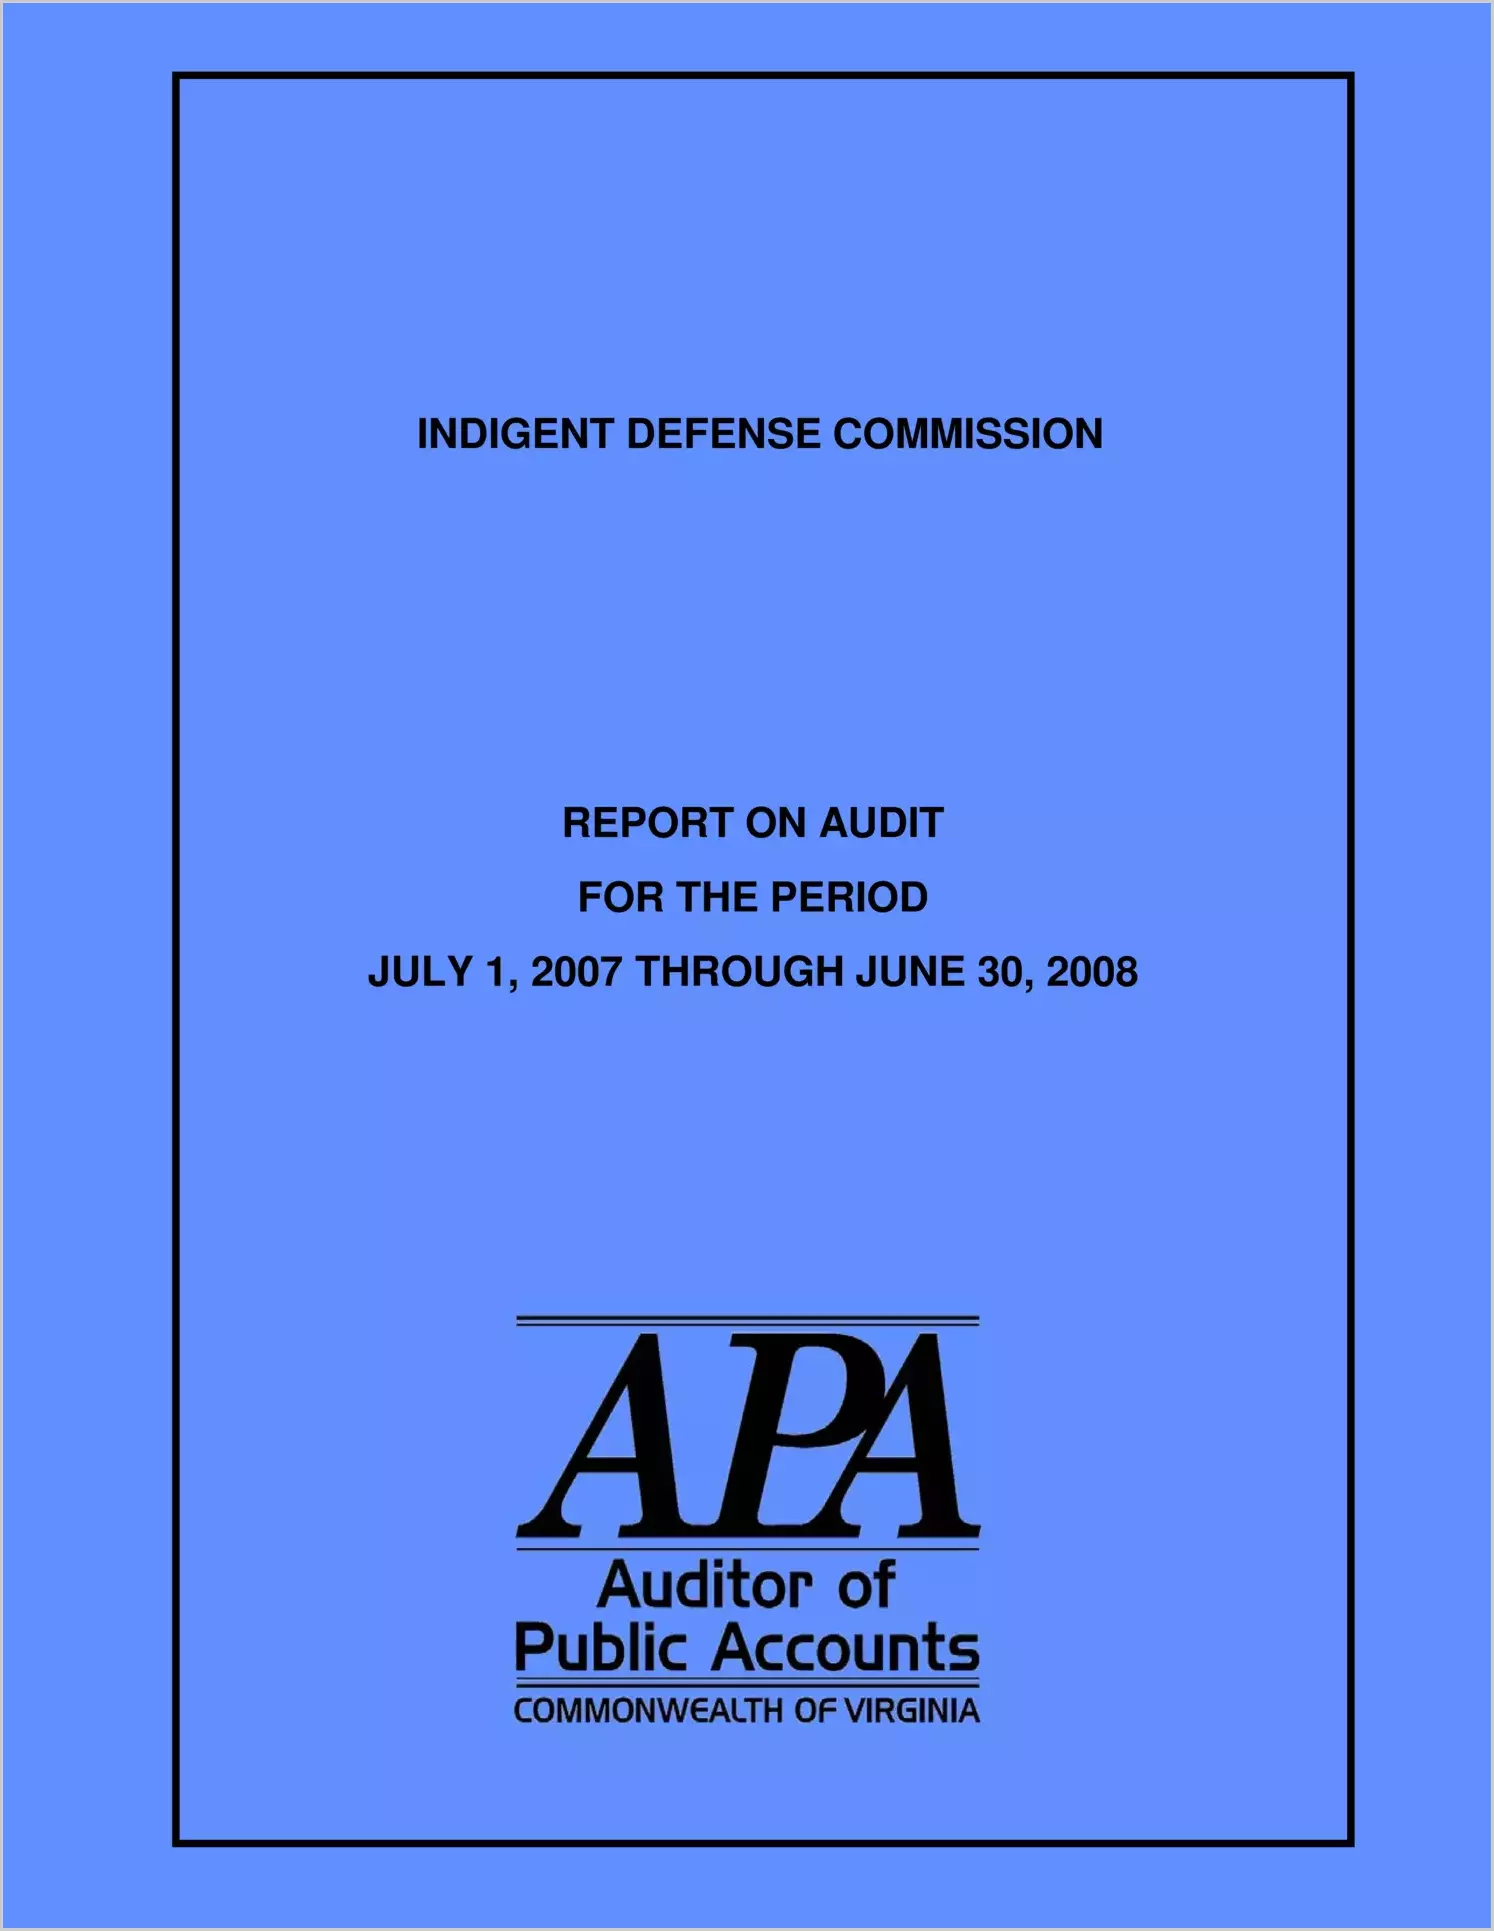 Indigent Defense Commission Report on Audit for the period July 1, 2006 through June 30, 2008